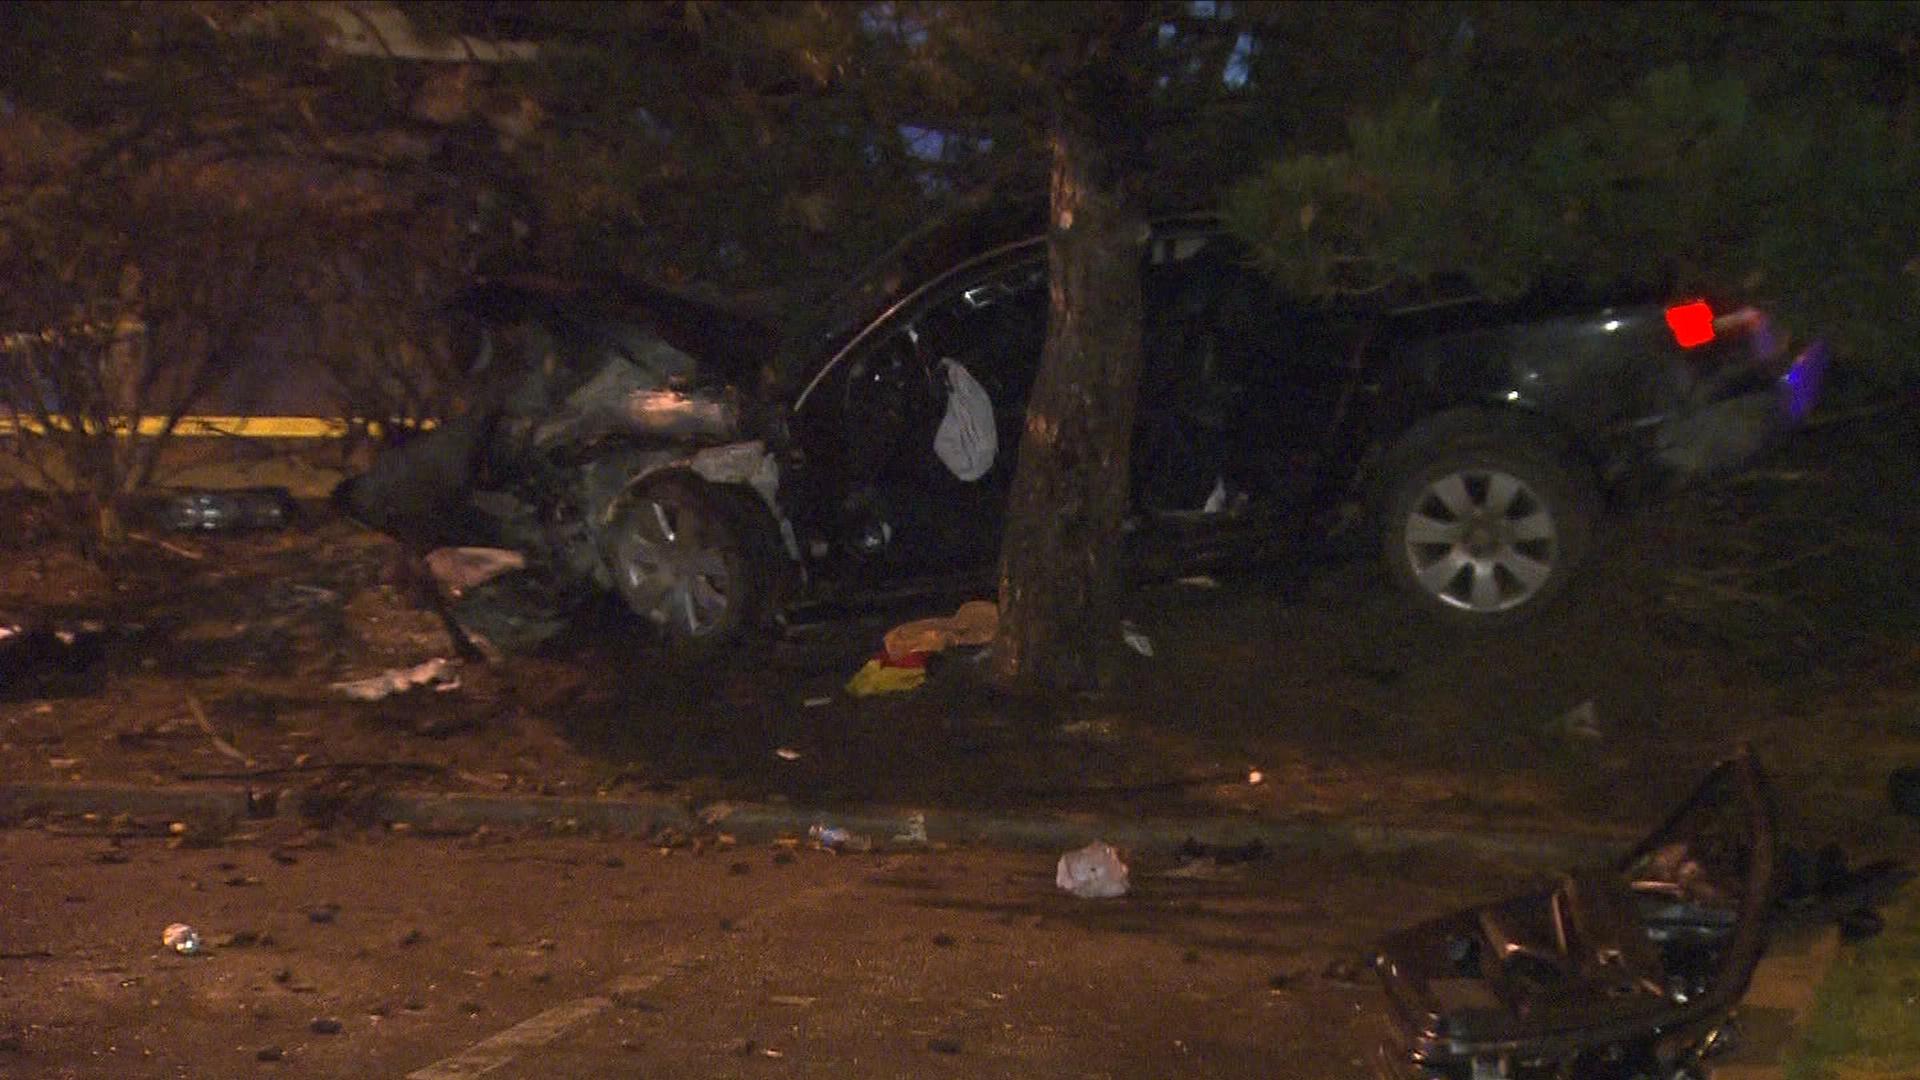 Man arrested after crash near Weston and Steeles, SIU ...